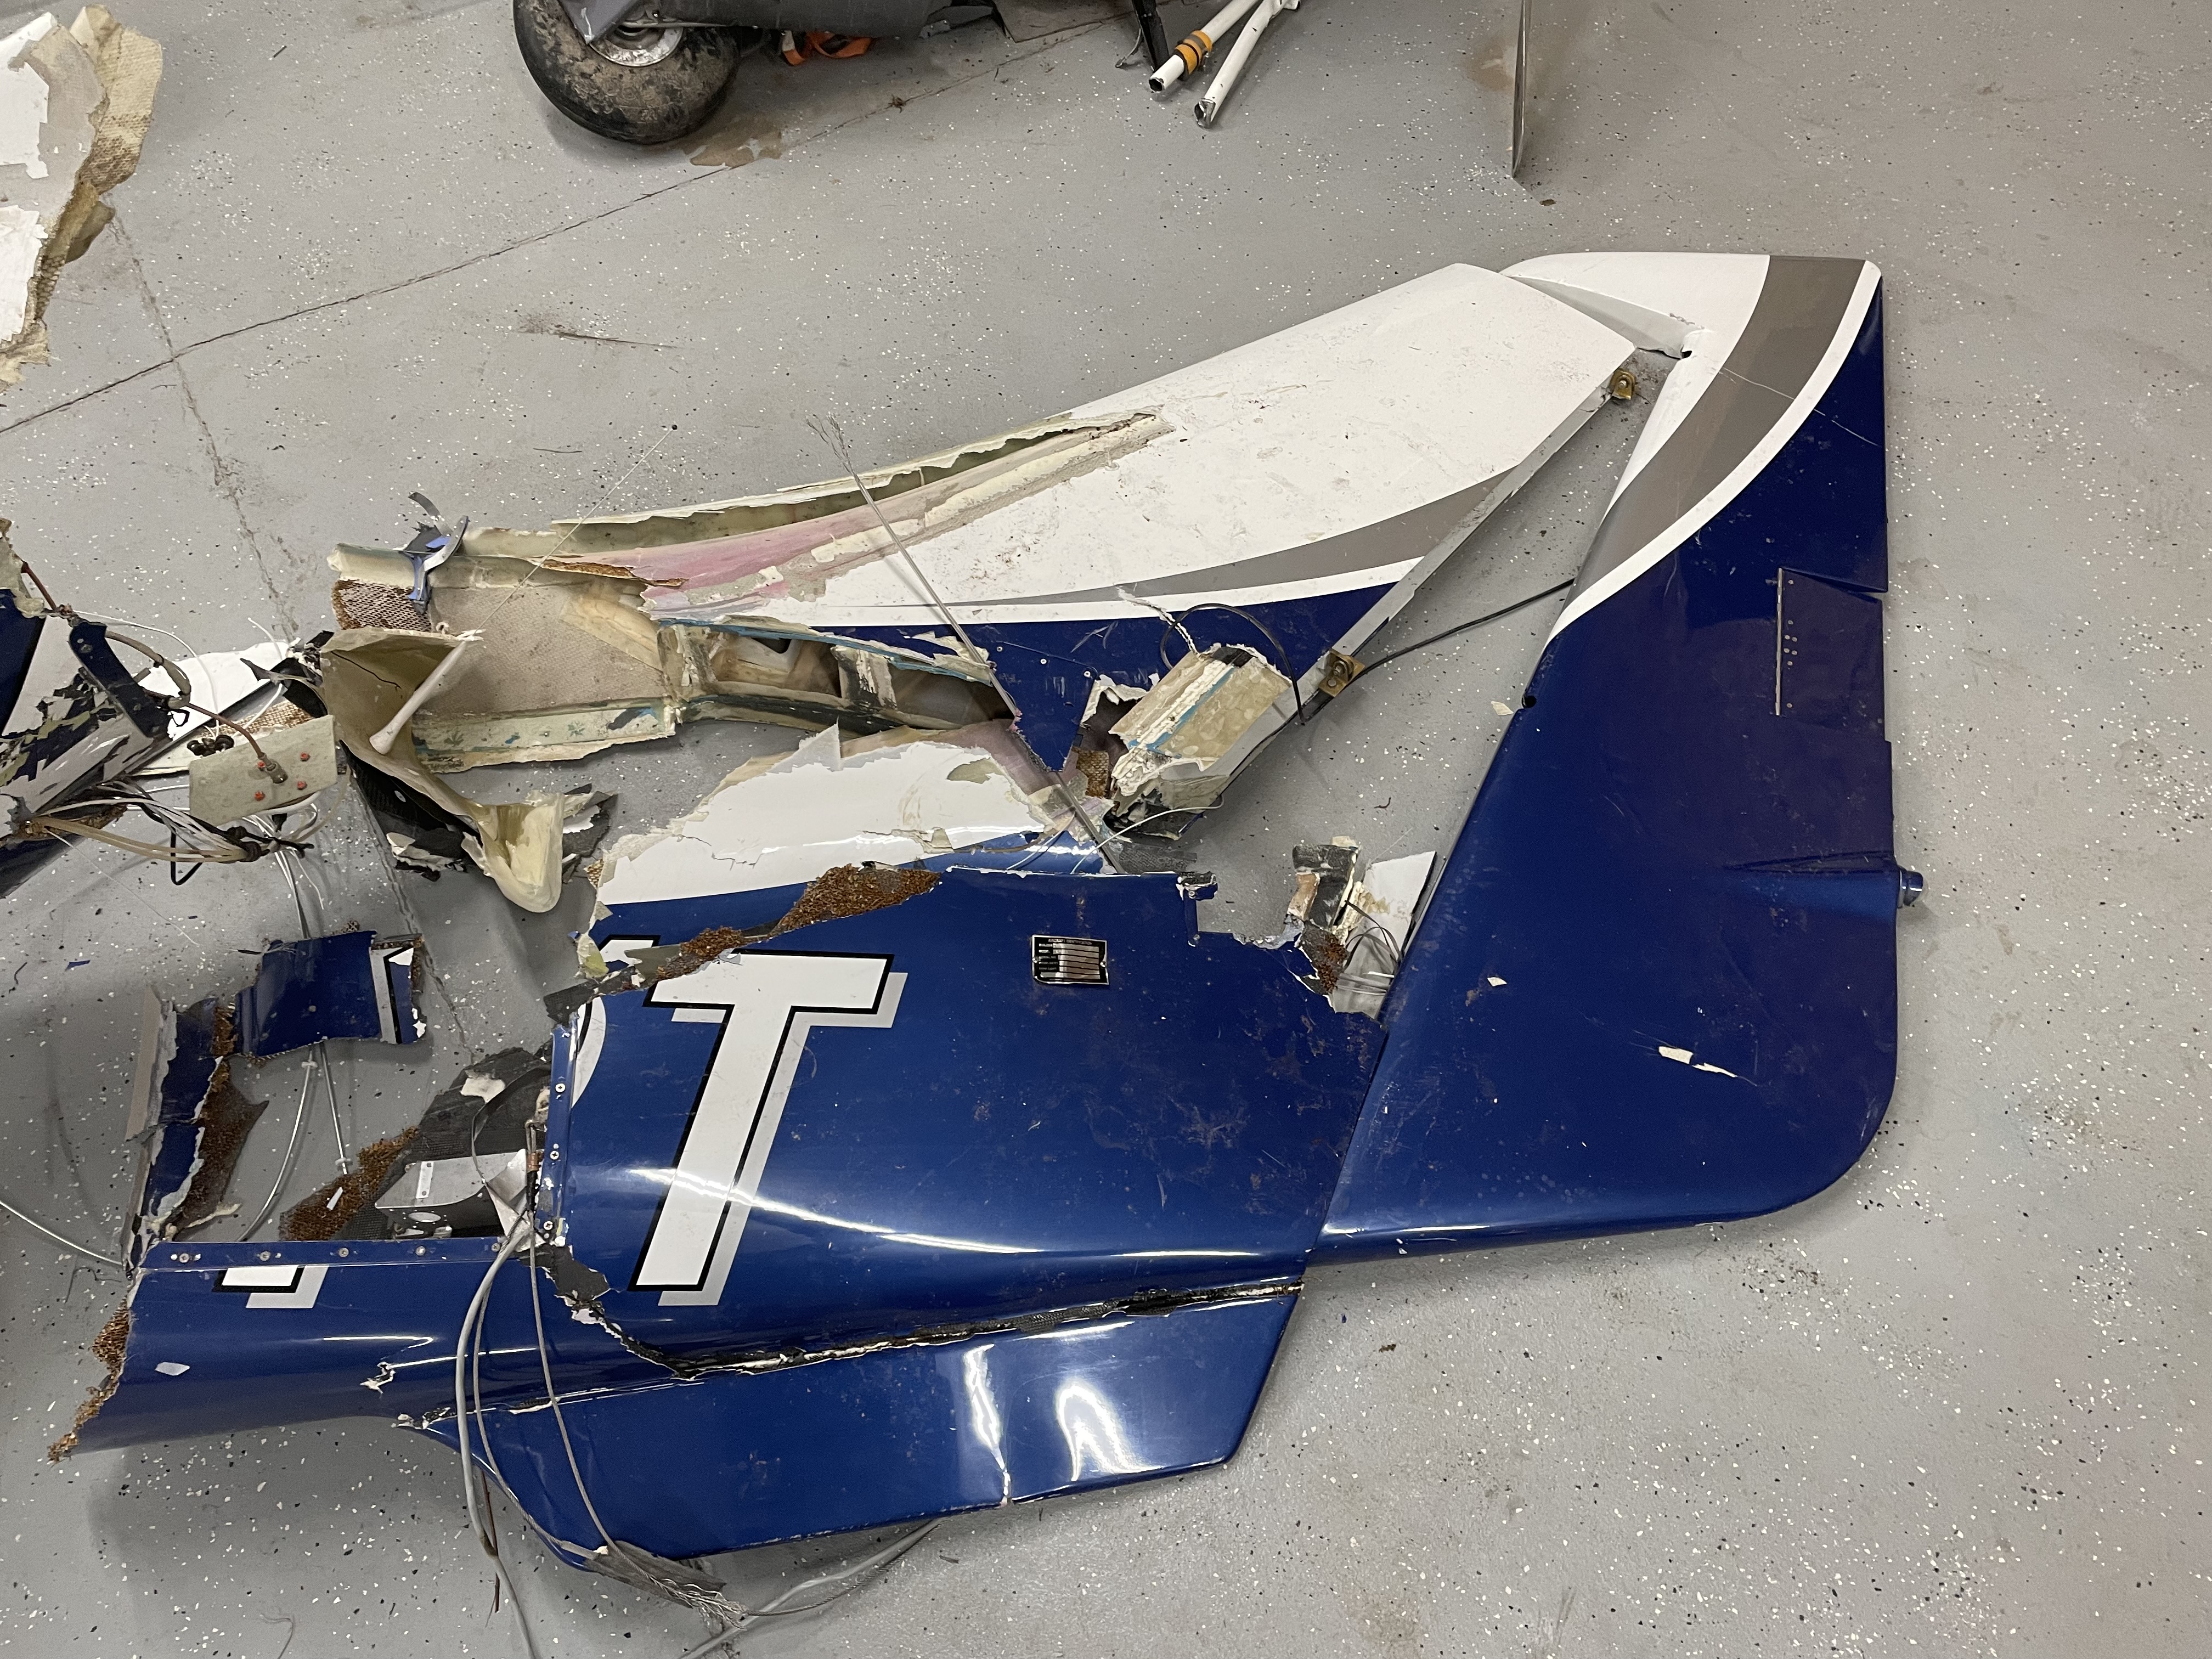 Vertical tail and rudder completely separated from plane.  Horizontal was found completely separated on its own as well.